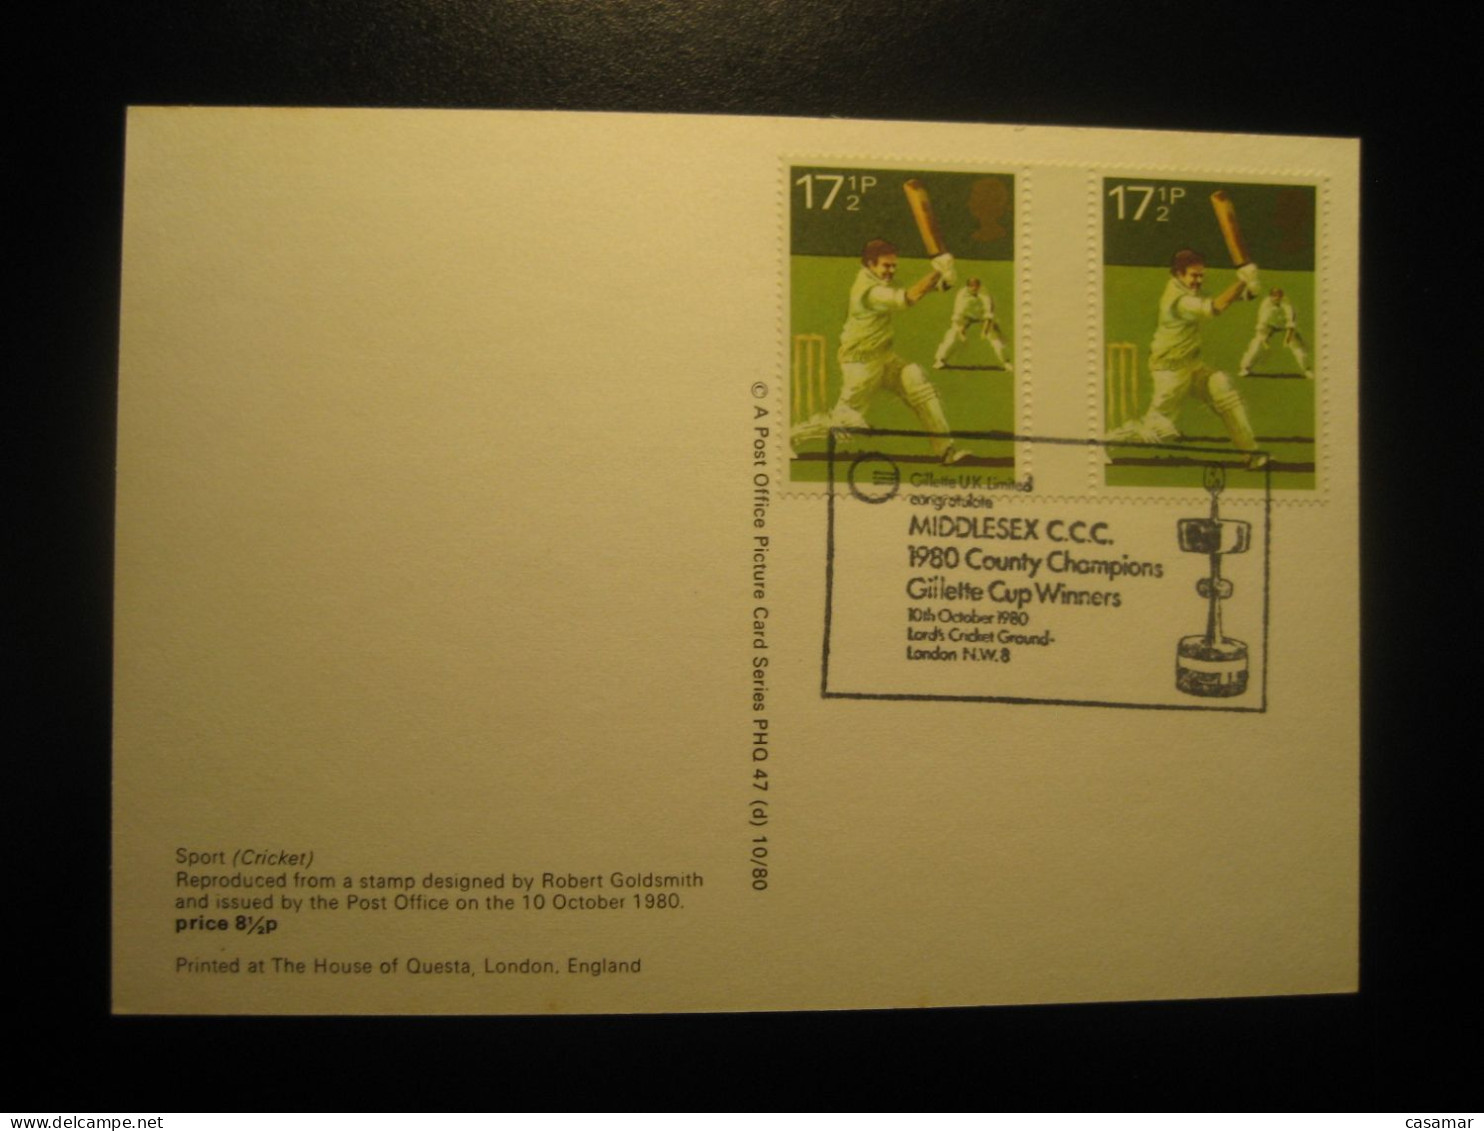 GILETTE Cup Winners MIDDLESEX CCC County Champions Lord's Ground Gillette London 1980 Cancel Card CRICKET England UK GB - Cricket